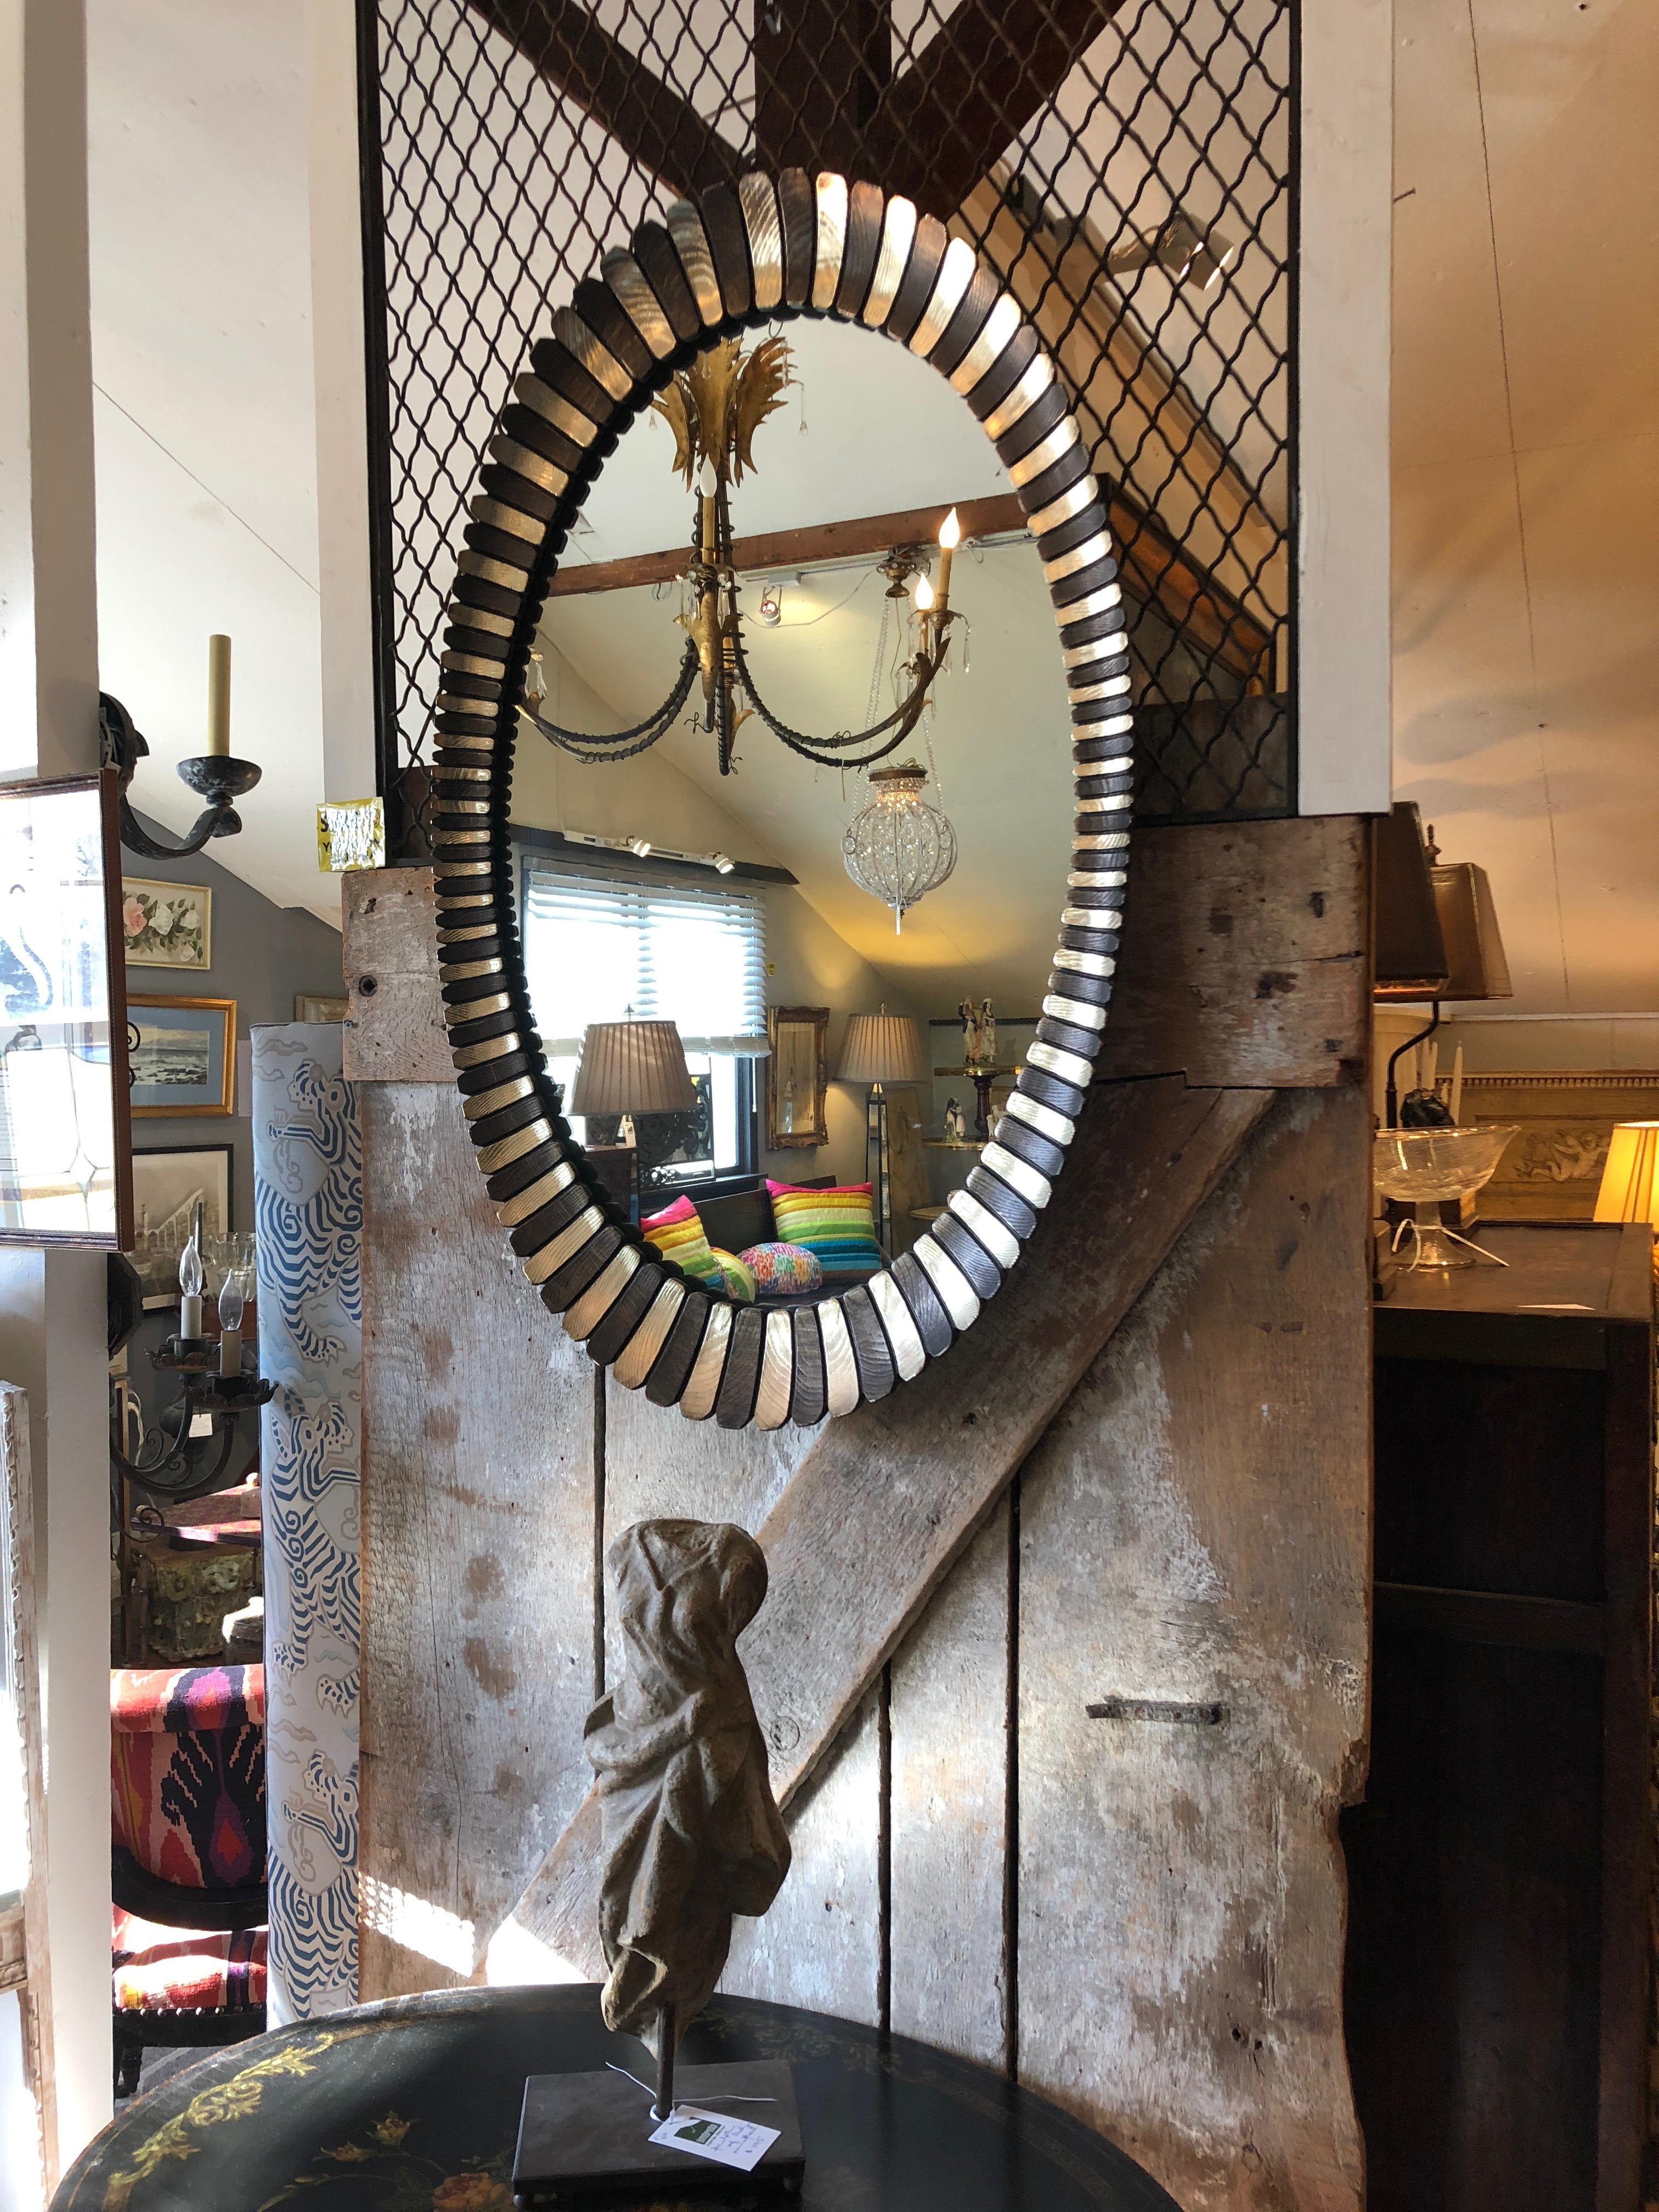 An eye-catching large oval mirror having alternating sunbursty slats in gilded gold and bronze.